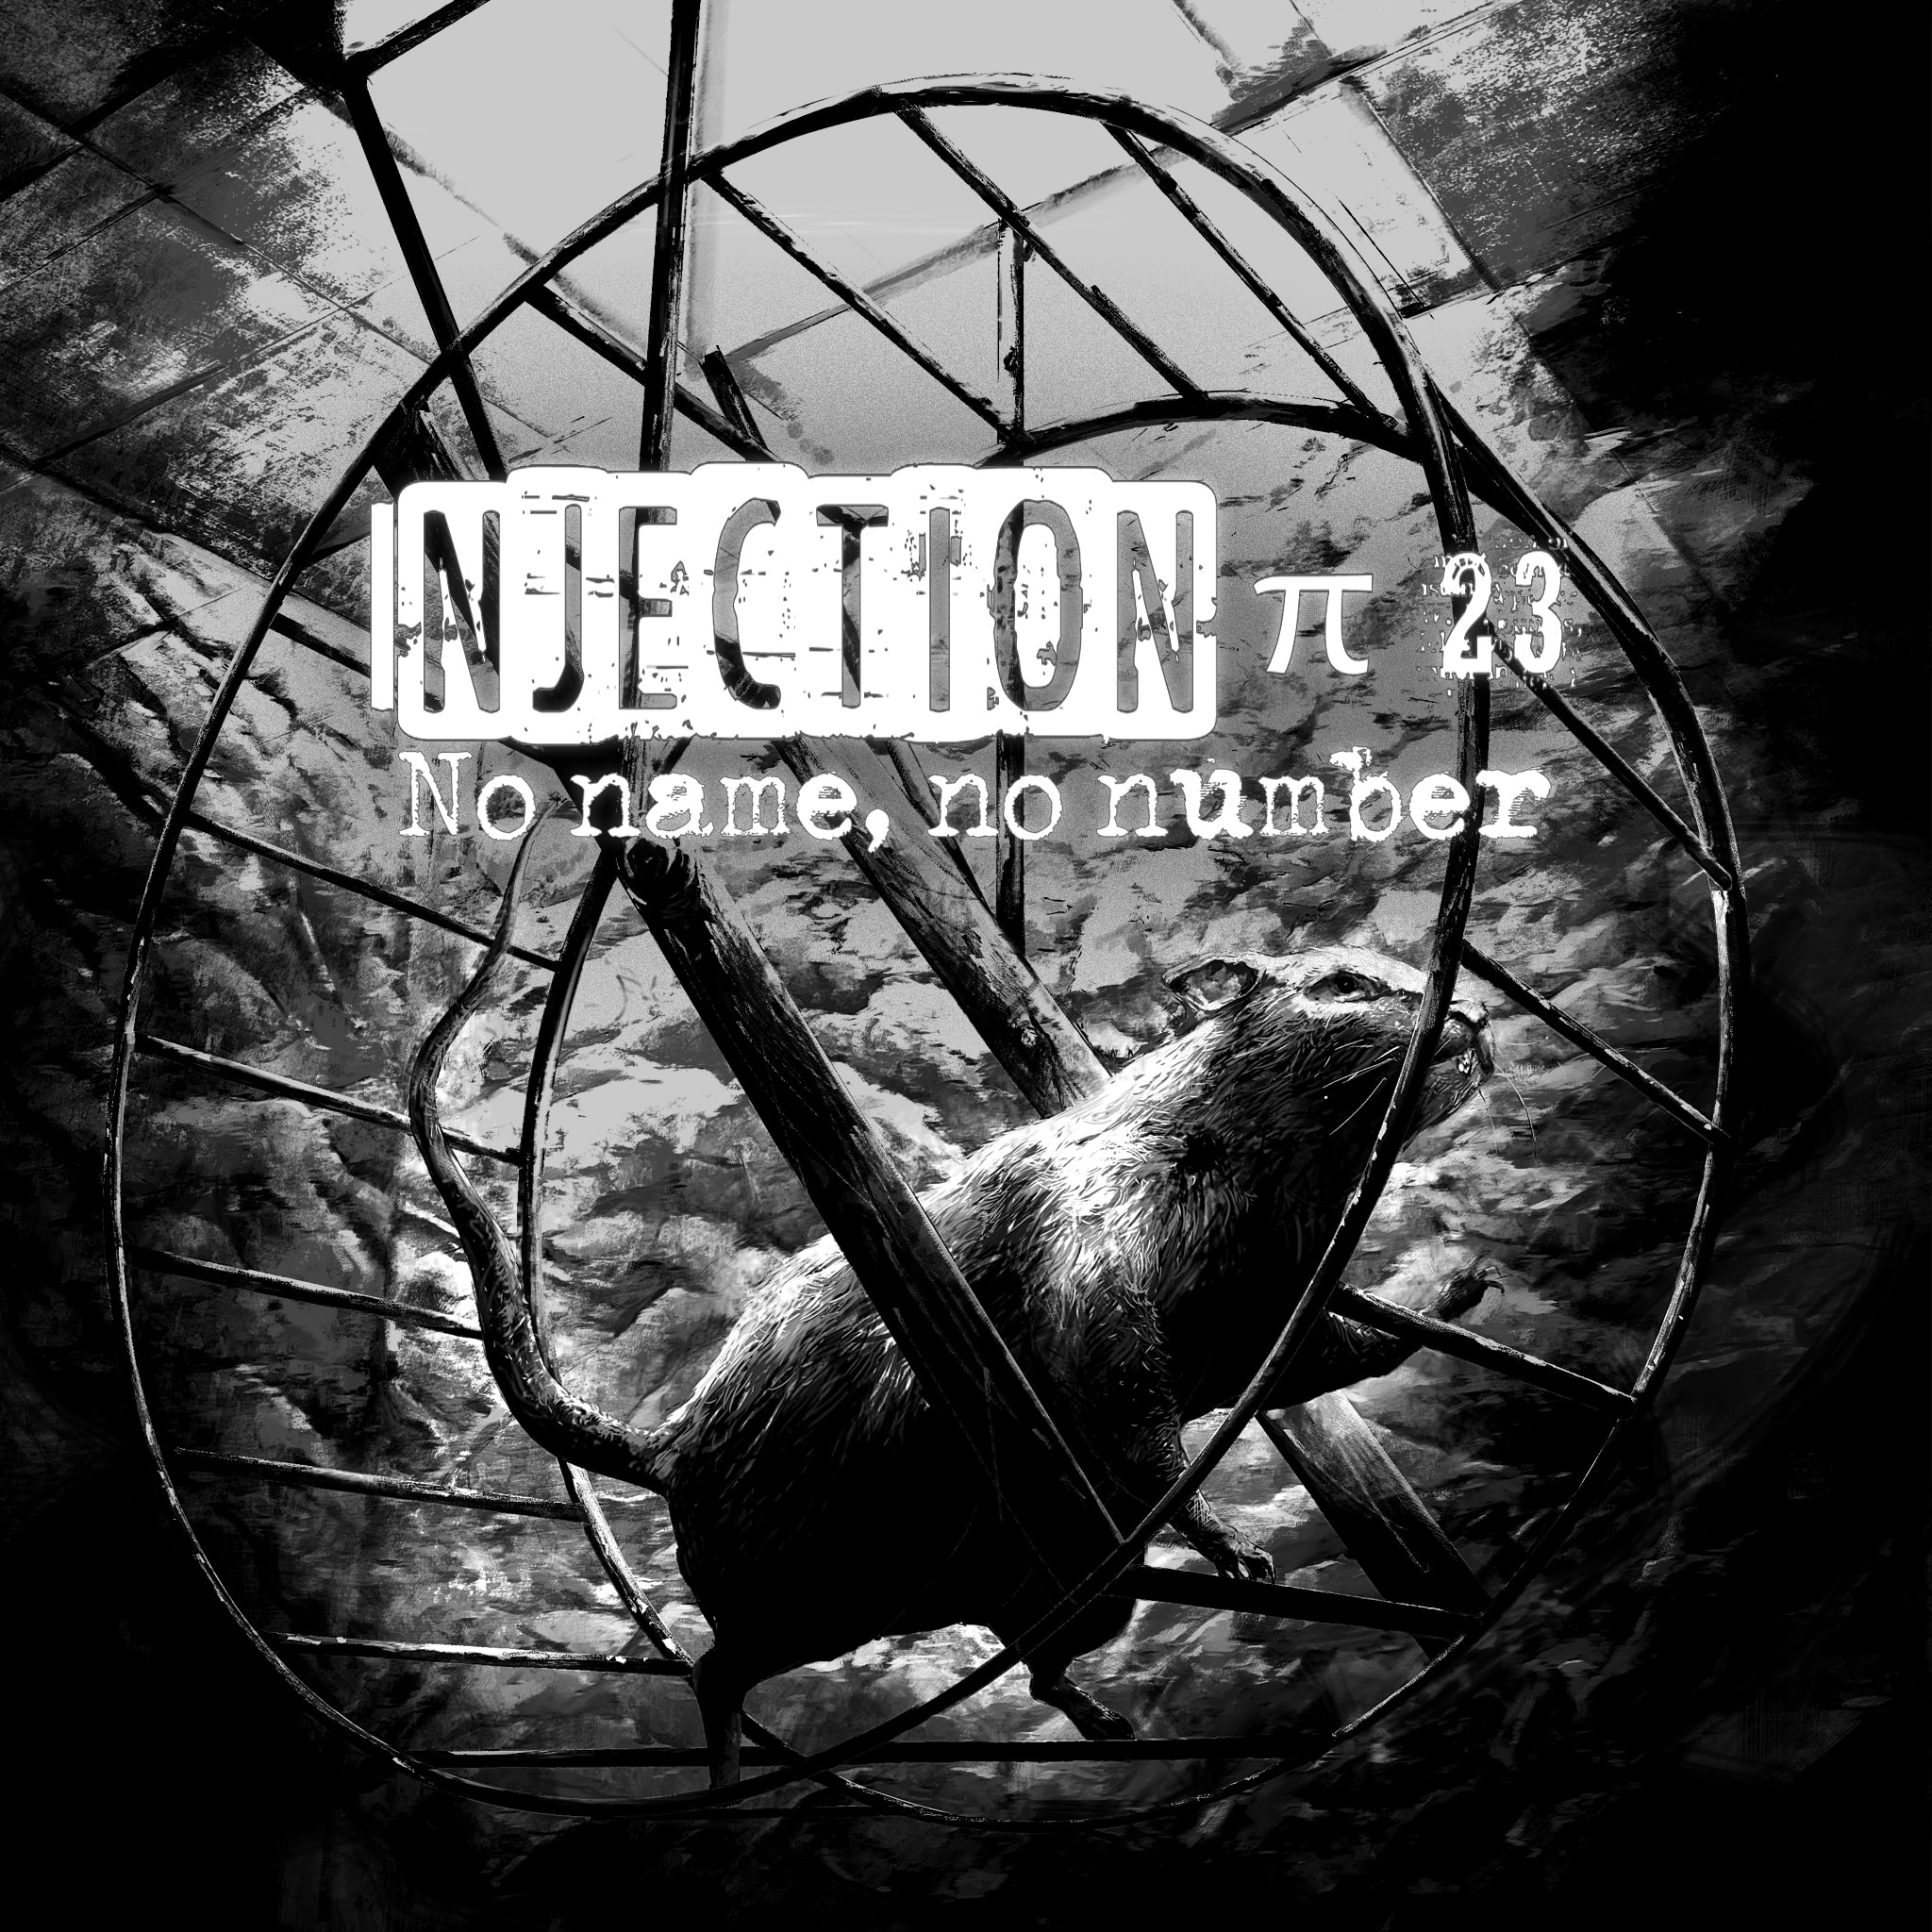 Injection π23 'No name, no number' (英文版)